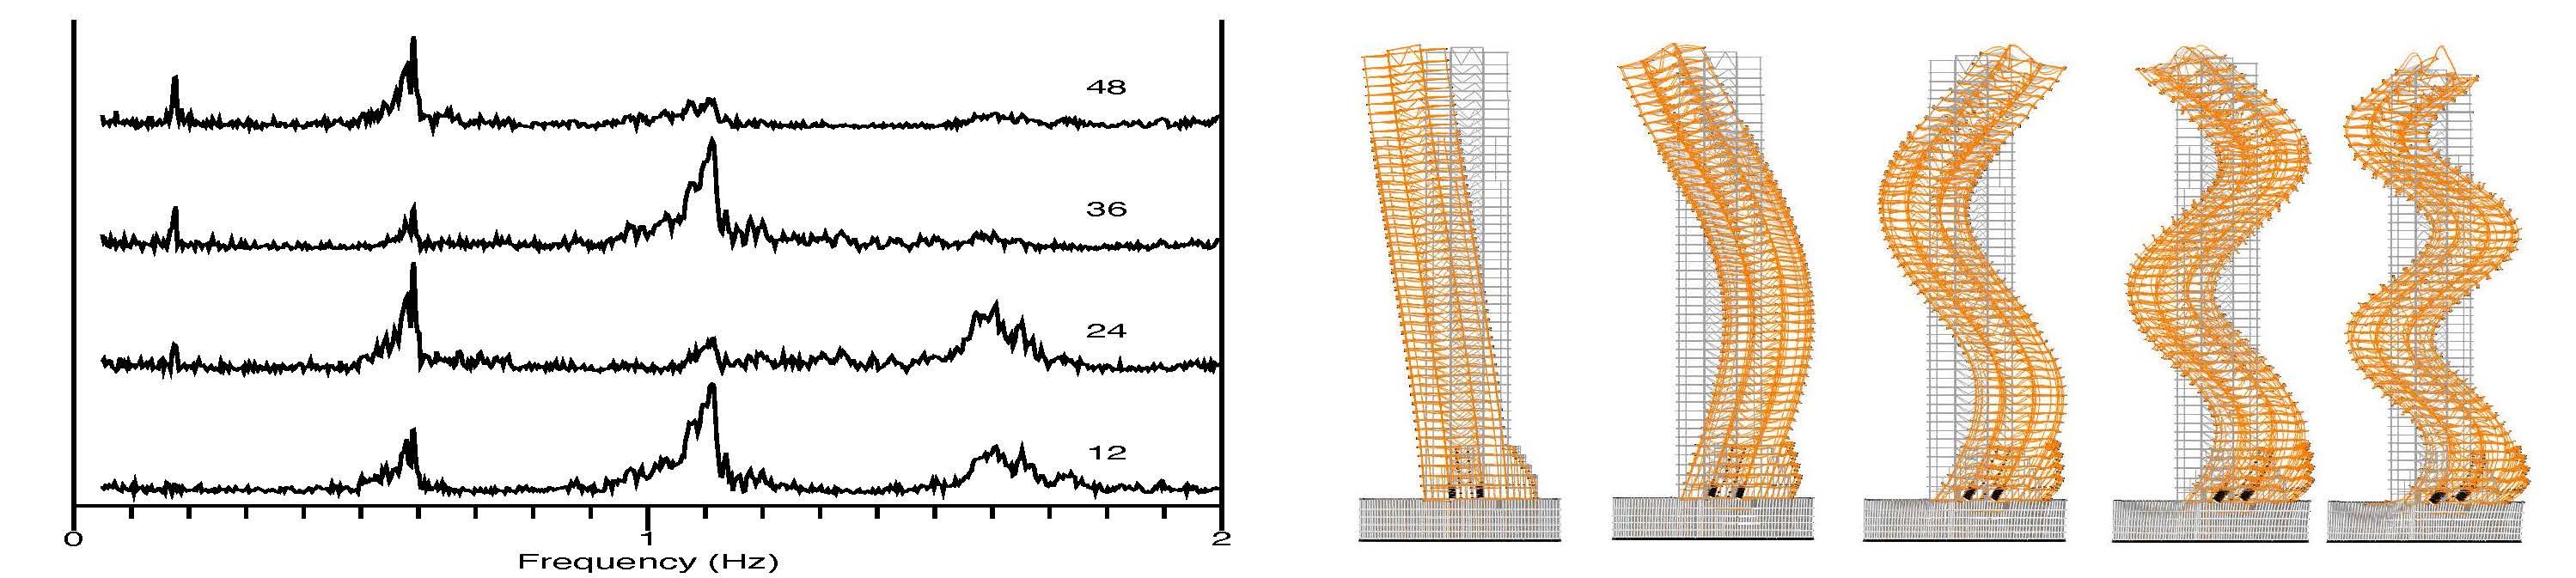 First few NS translational modes of 52-story building, illustrated by CSN data 
for La Habra earthquake, and the Finite-Element model.